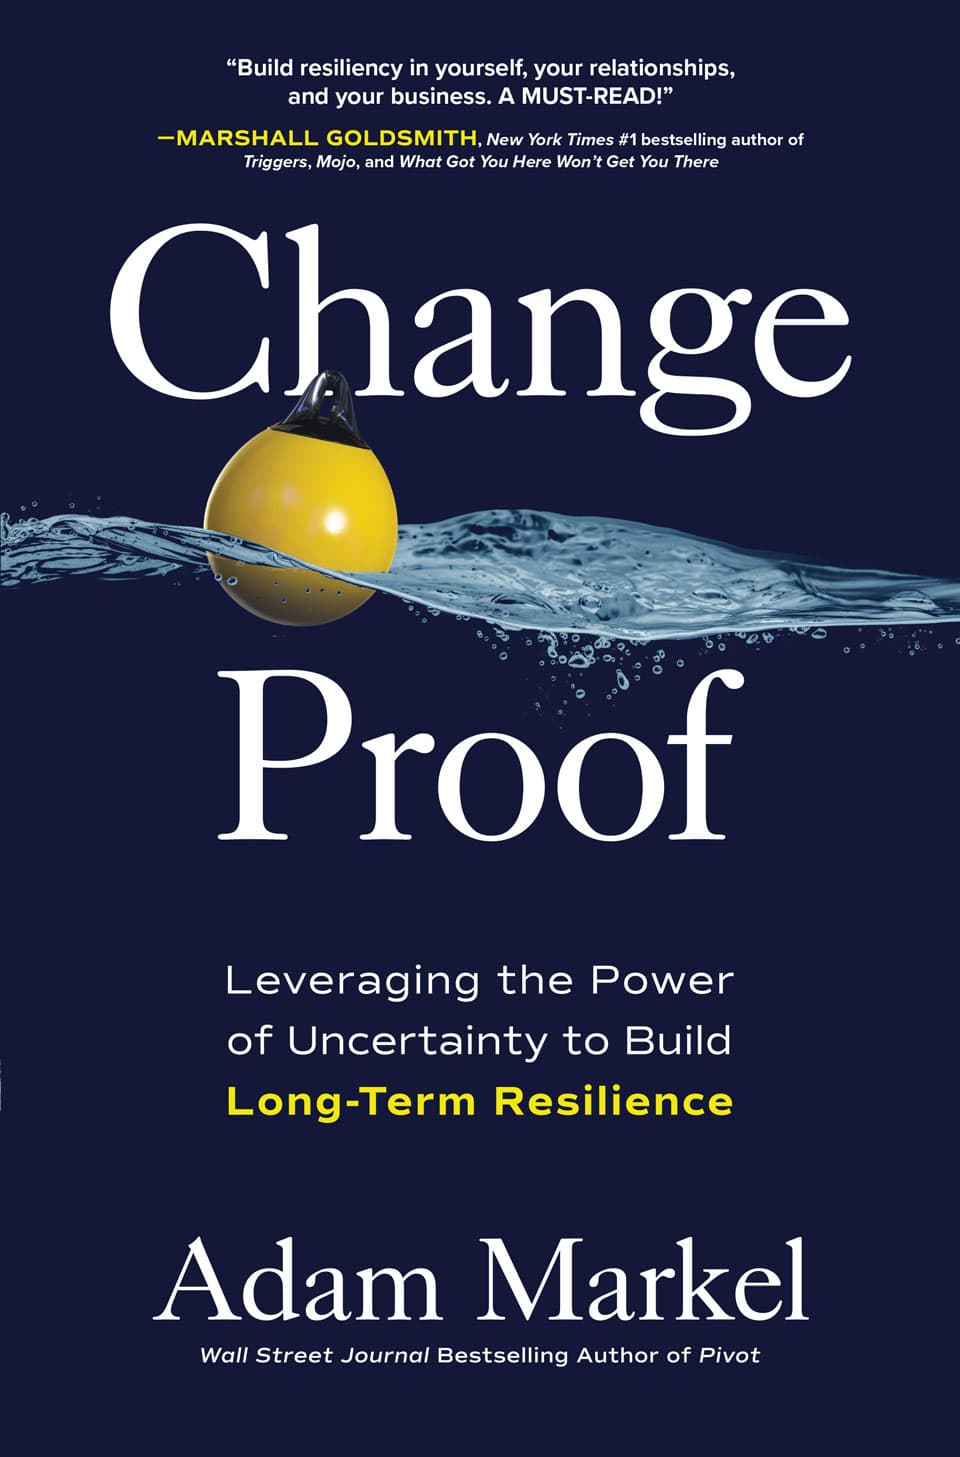 Change Proof: Leveraging the Power of Uncertainty to Build Long-term Resilience by Adam Markel